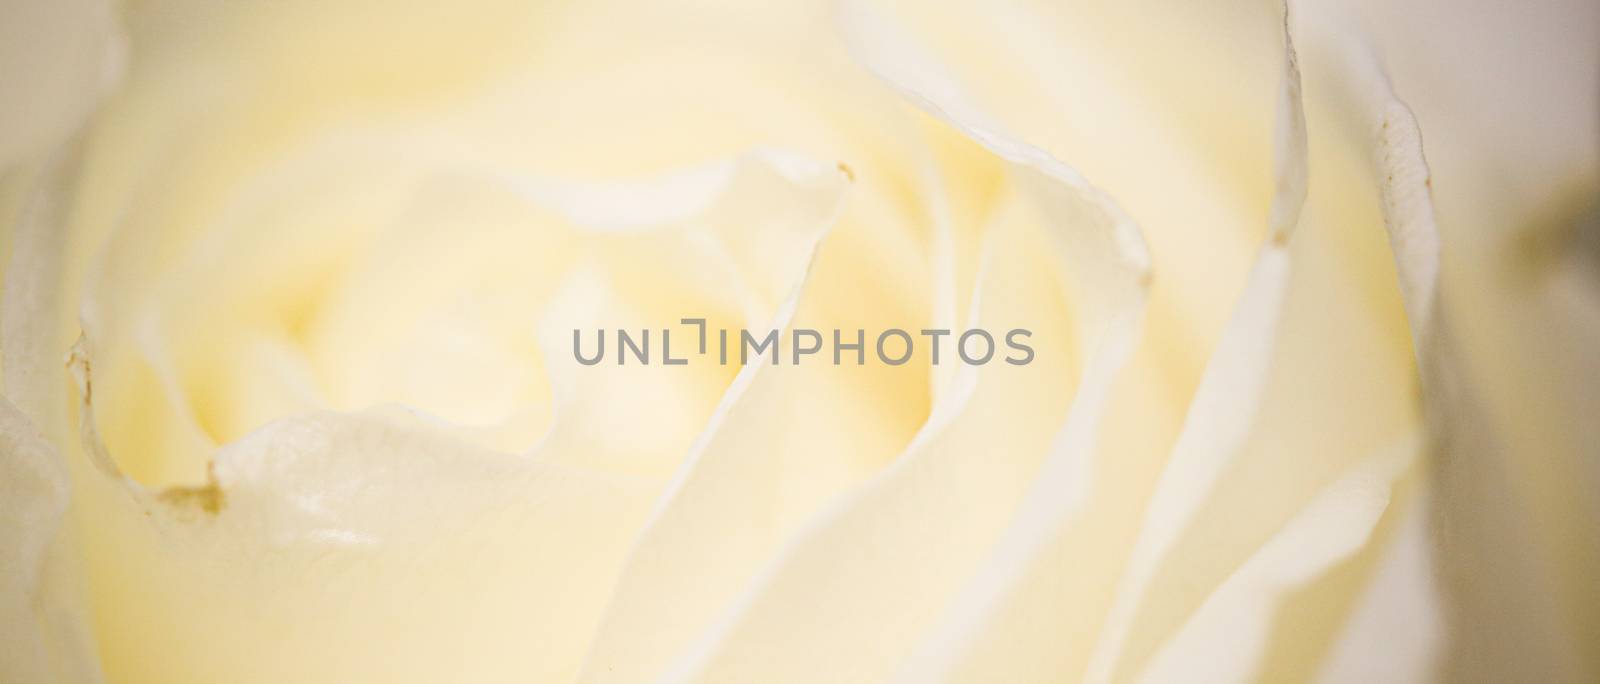 Rose flower in bloom, abstract floral blossom art background, ma by Anneleven